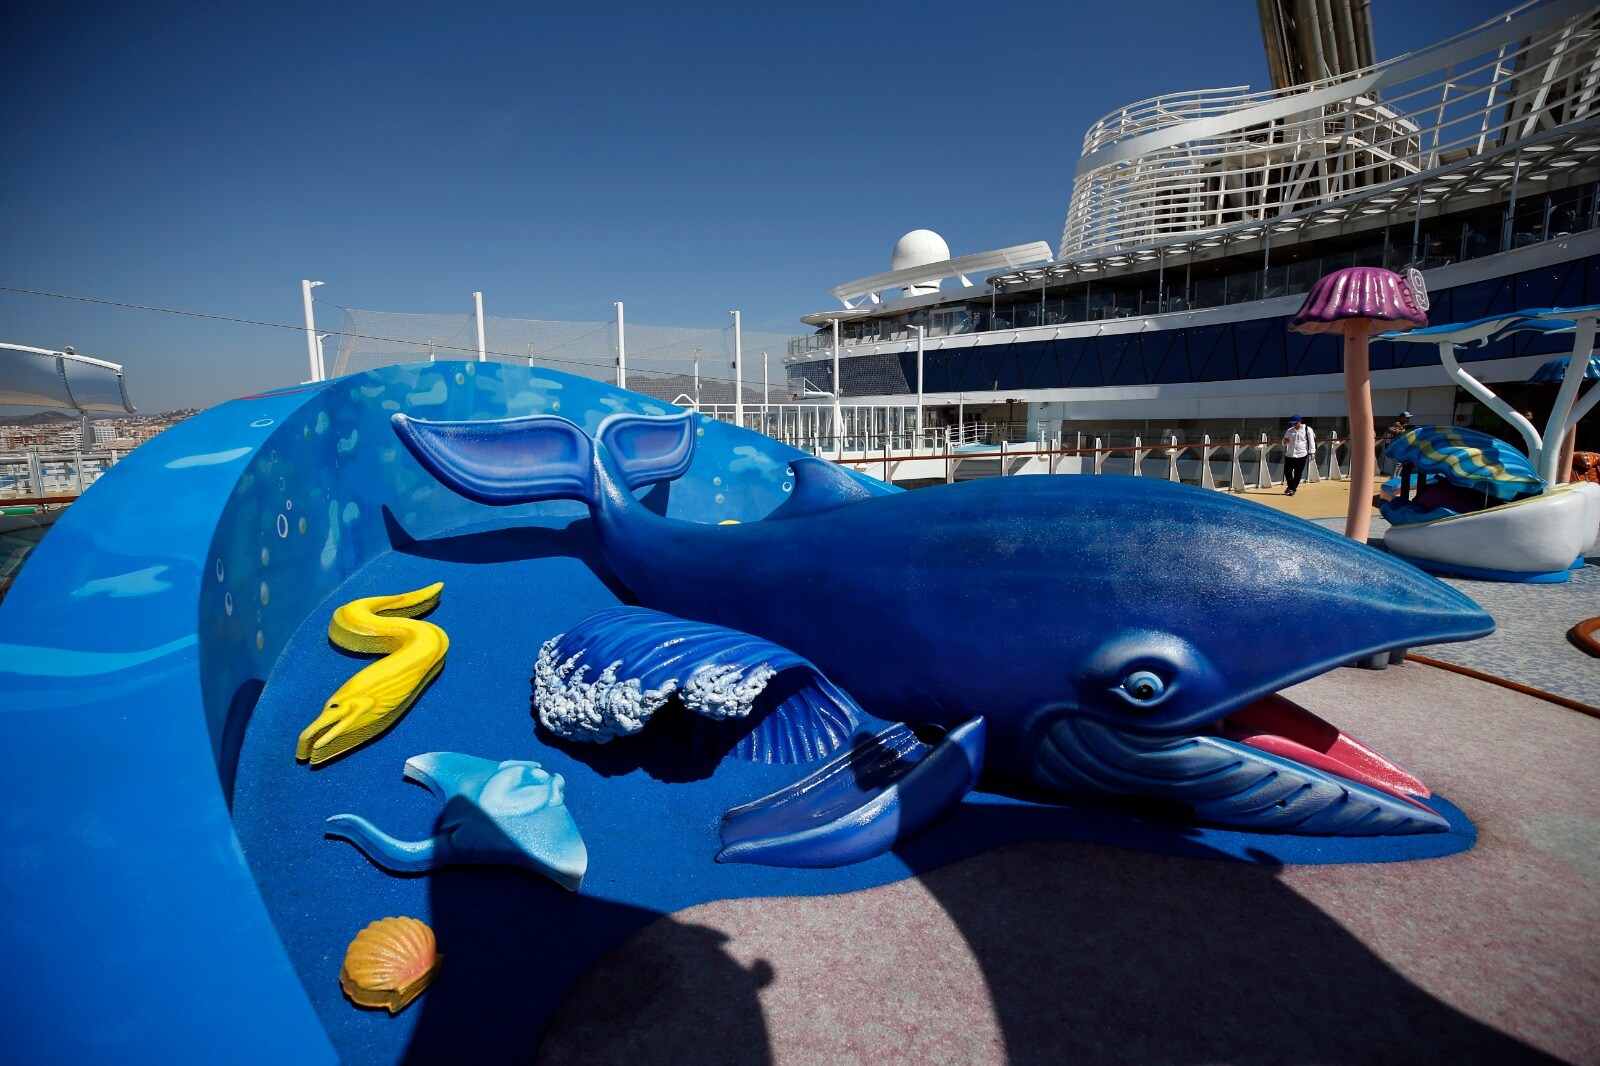 The Wonder of the Seas docks in Malaga, its first port of call in Spain.